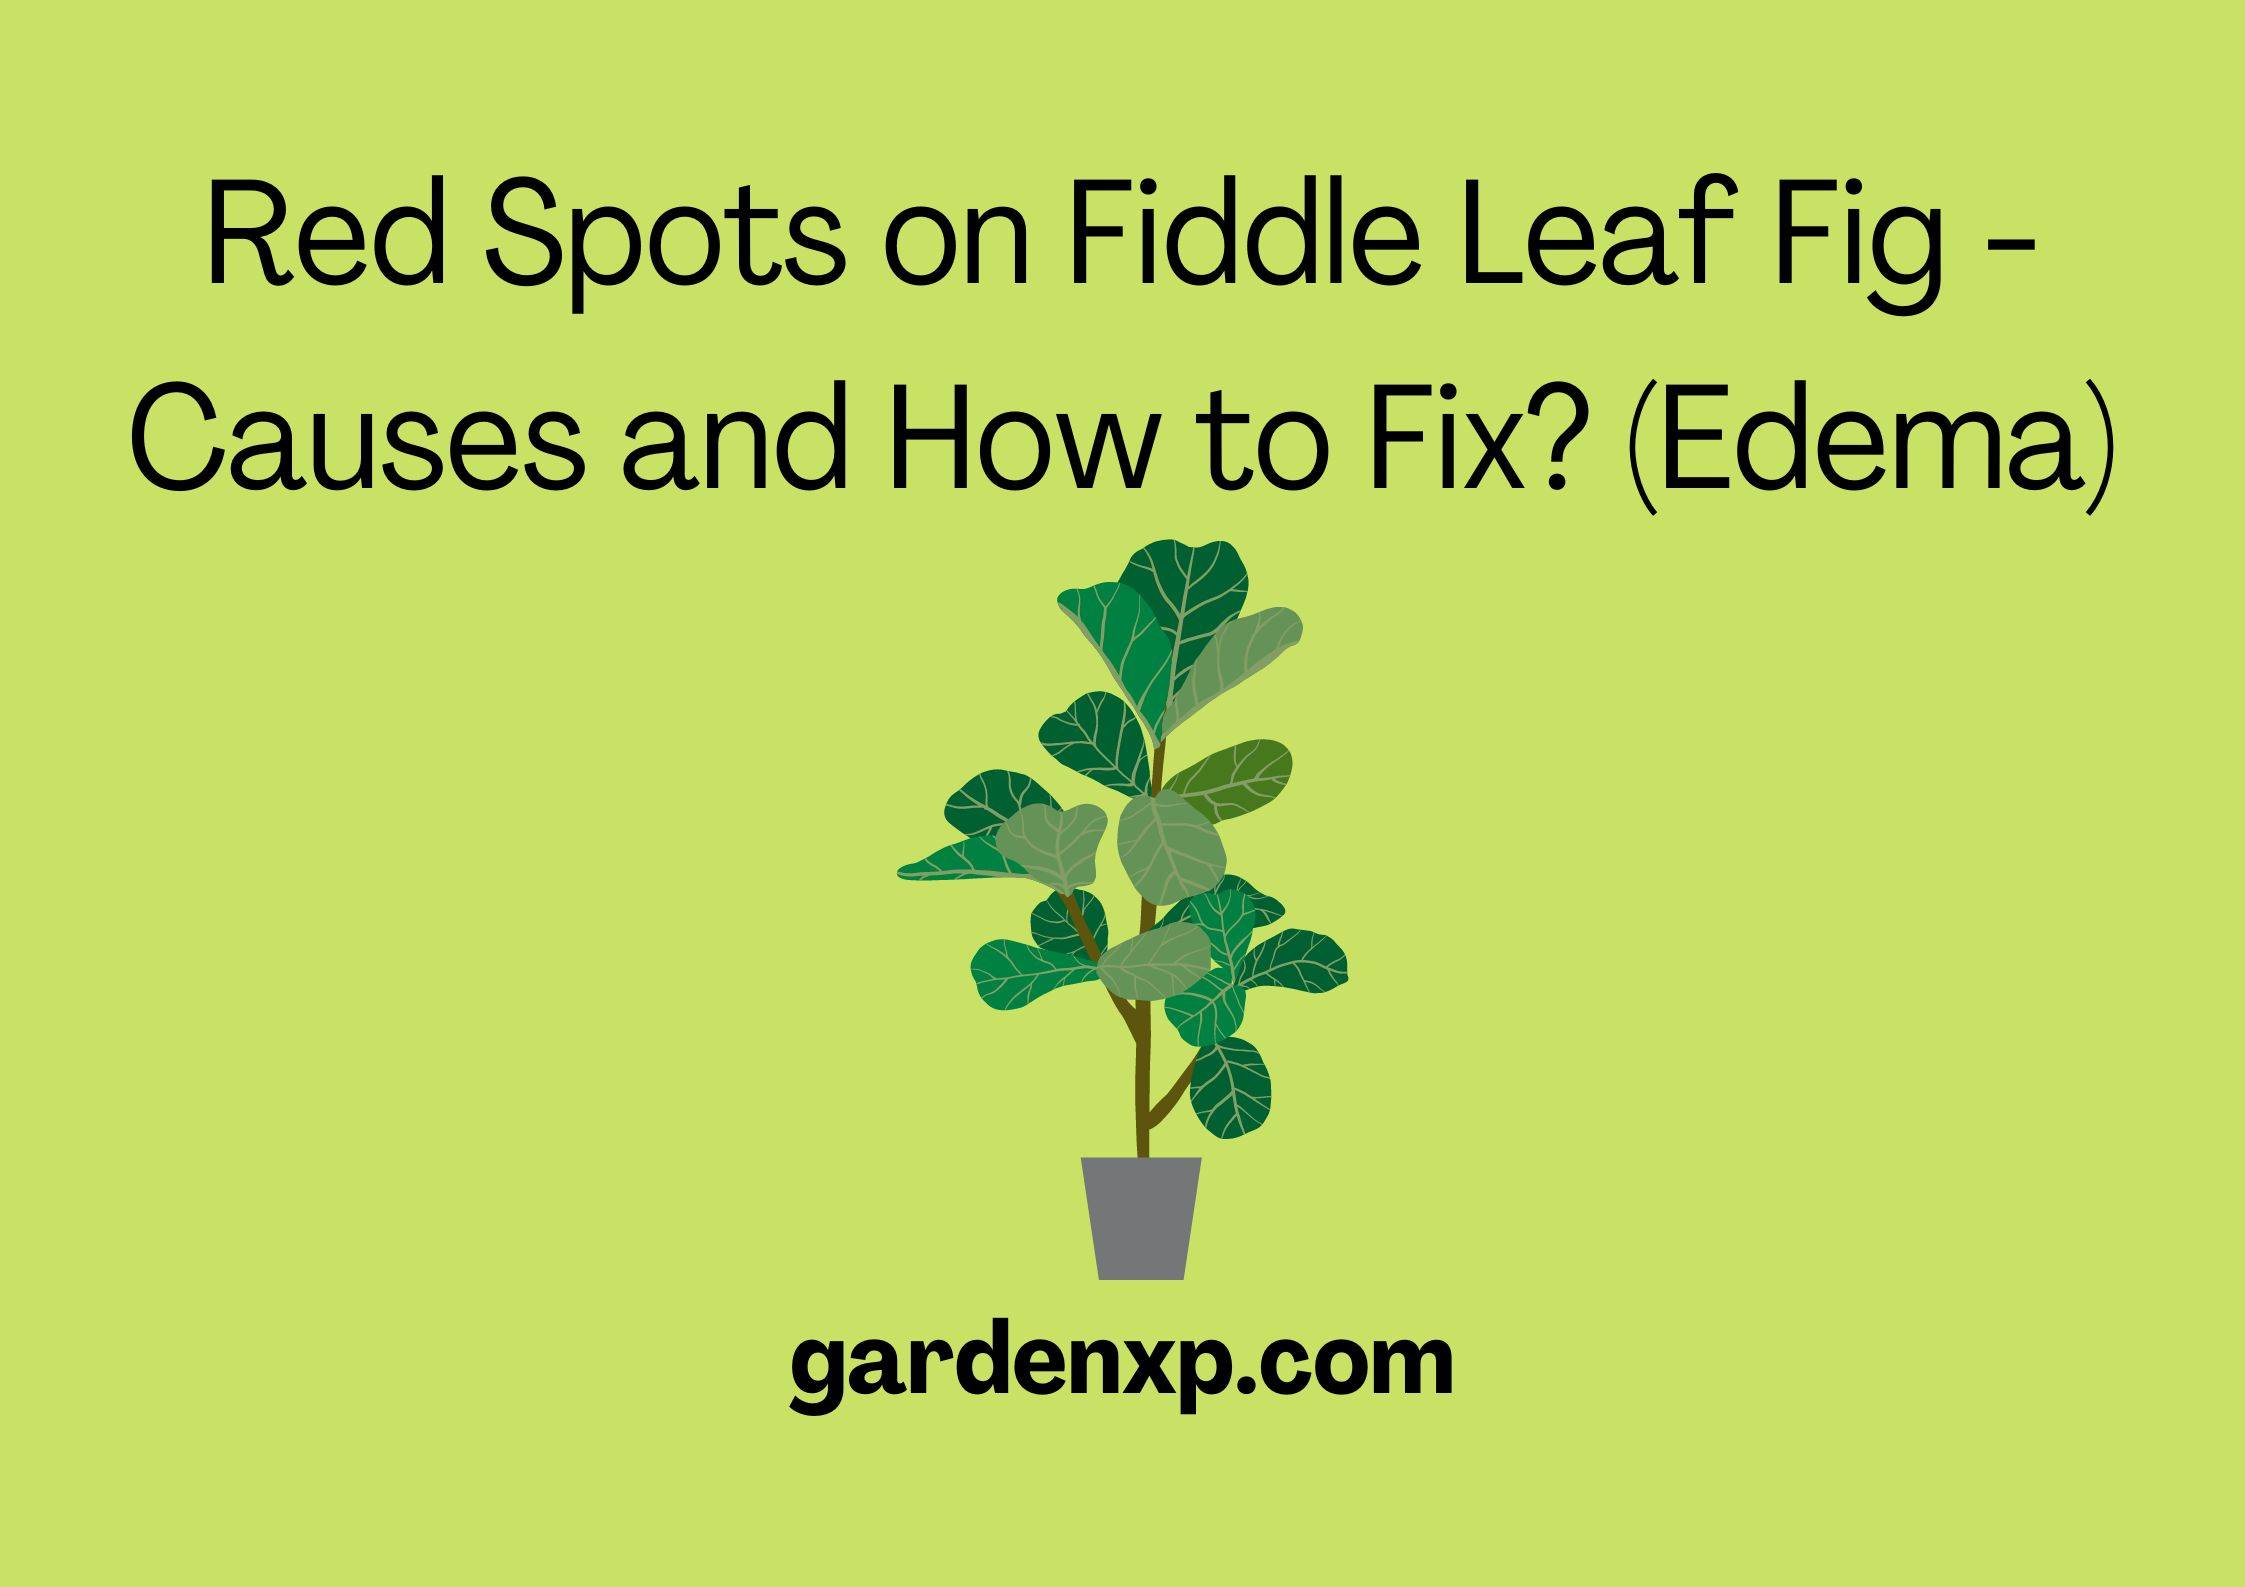 Red Spots on Fiddle Leaf Fig - Causes and How to Fix? (Edema)